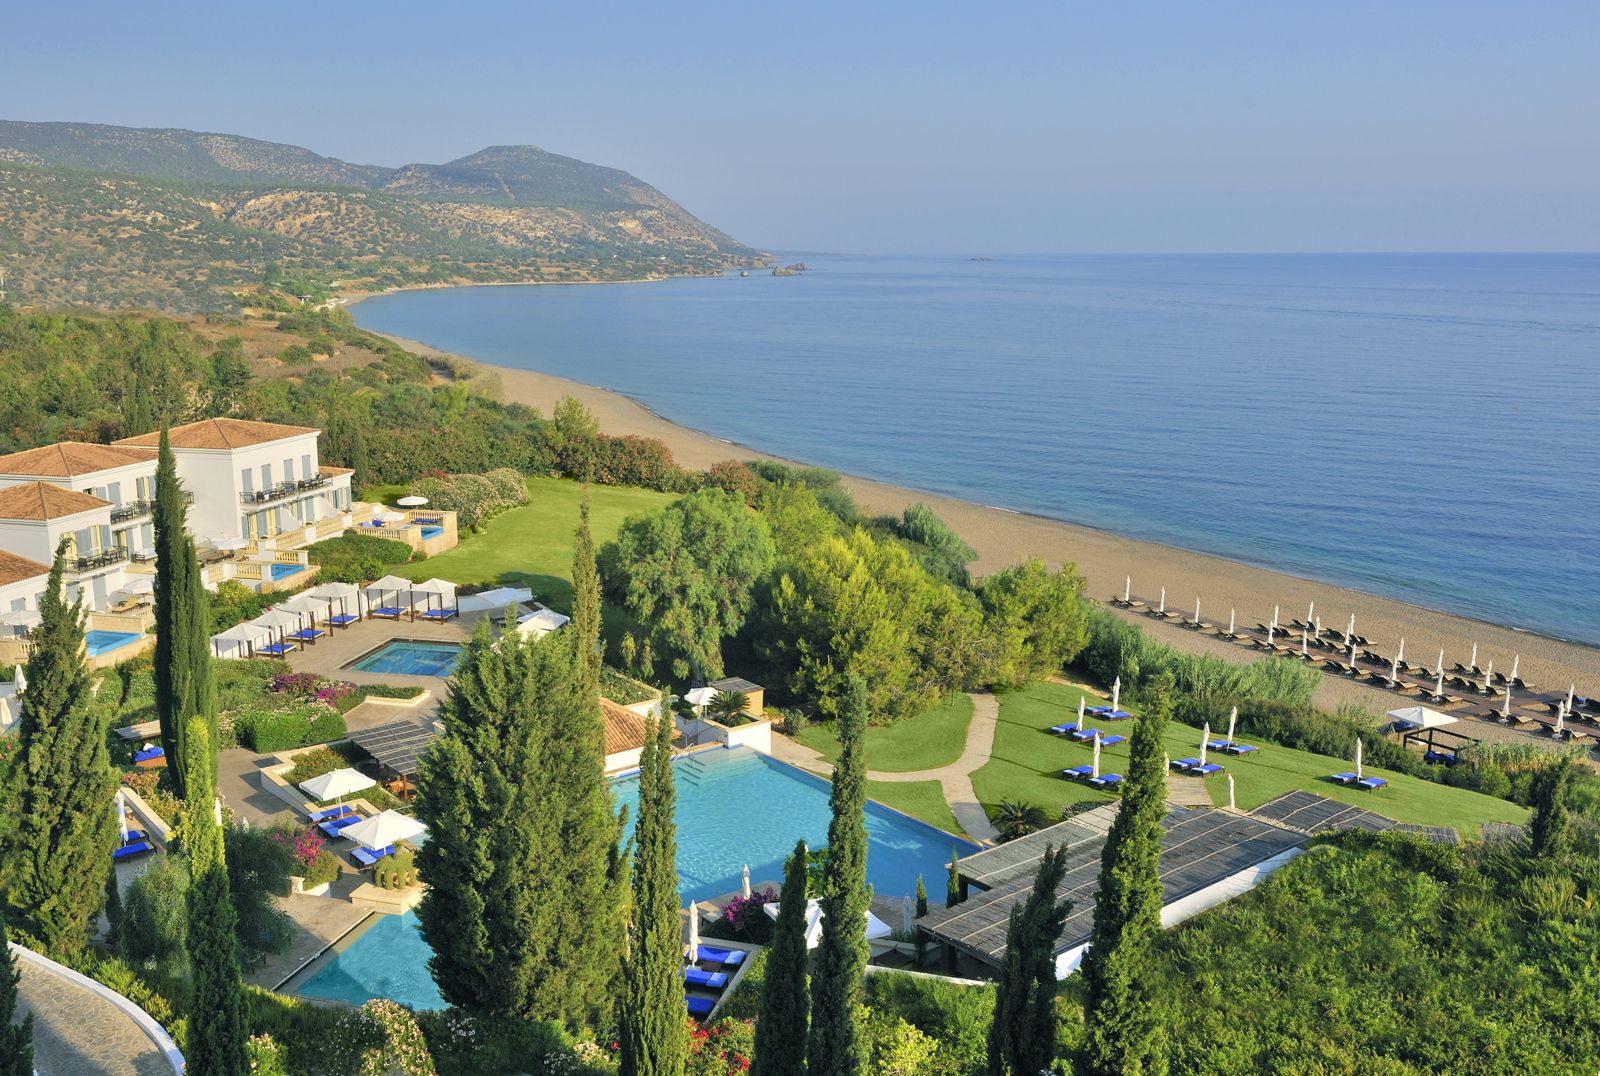 Aerial view of the Anassa Resort and beach in Cyprus